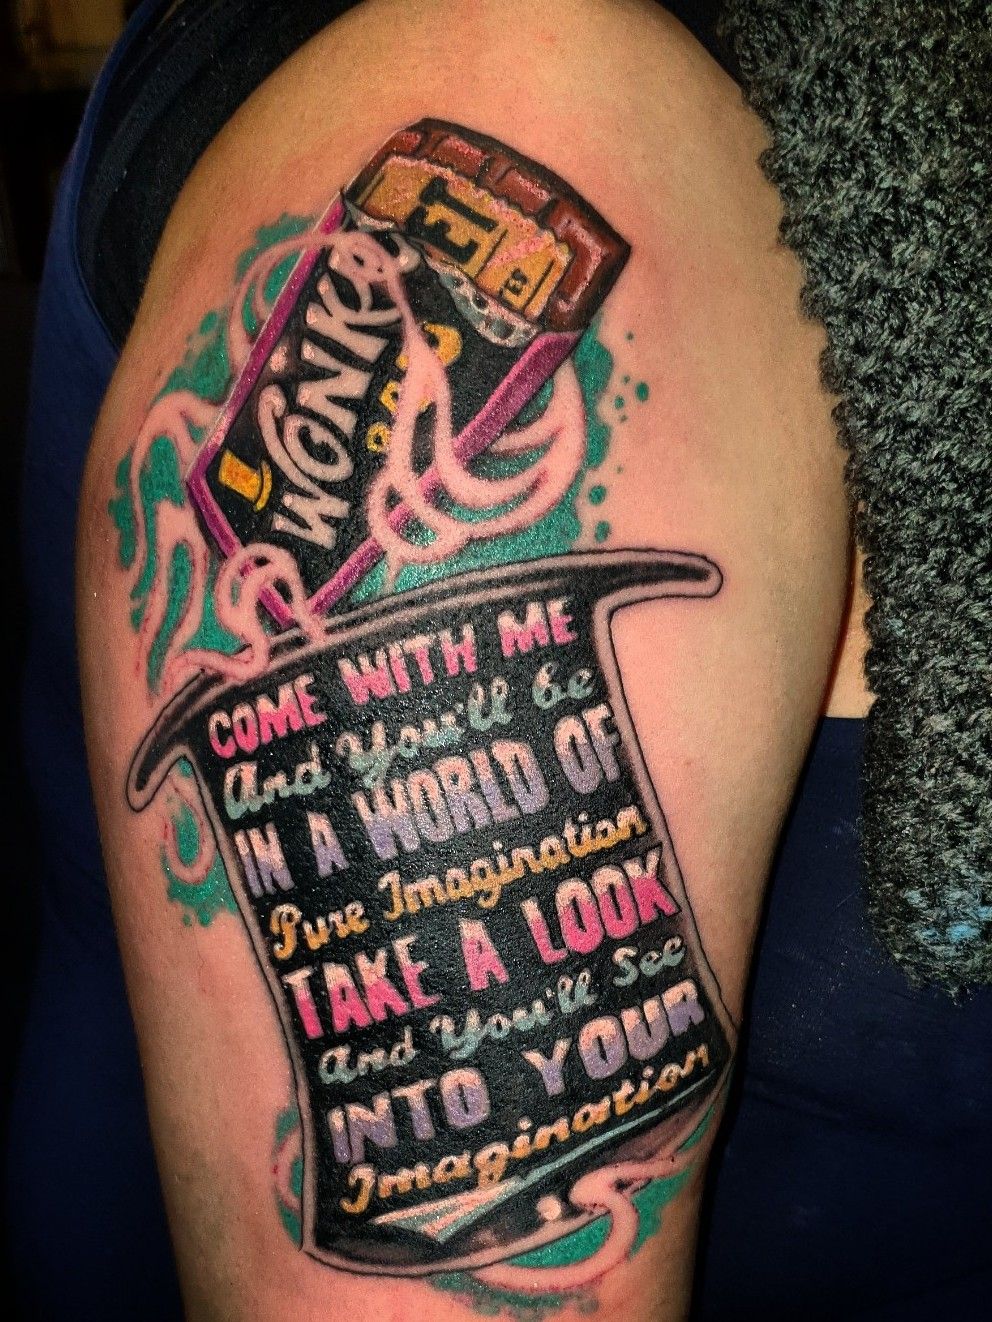 Willy Wonka done by Ashley Nicola  Stay Gold Tattoo Company in Knoxville  MD  rtattoos